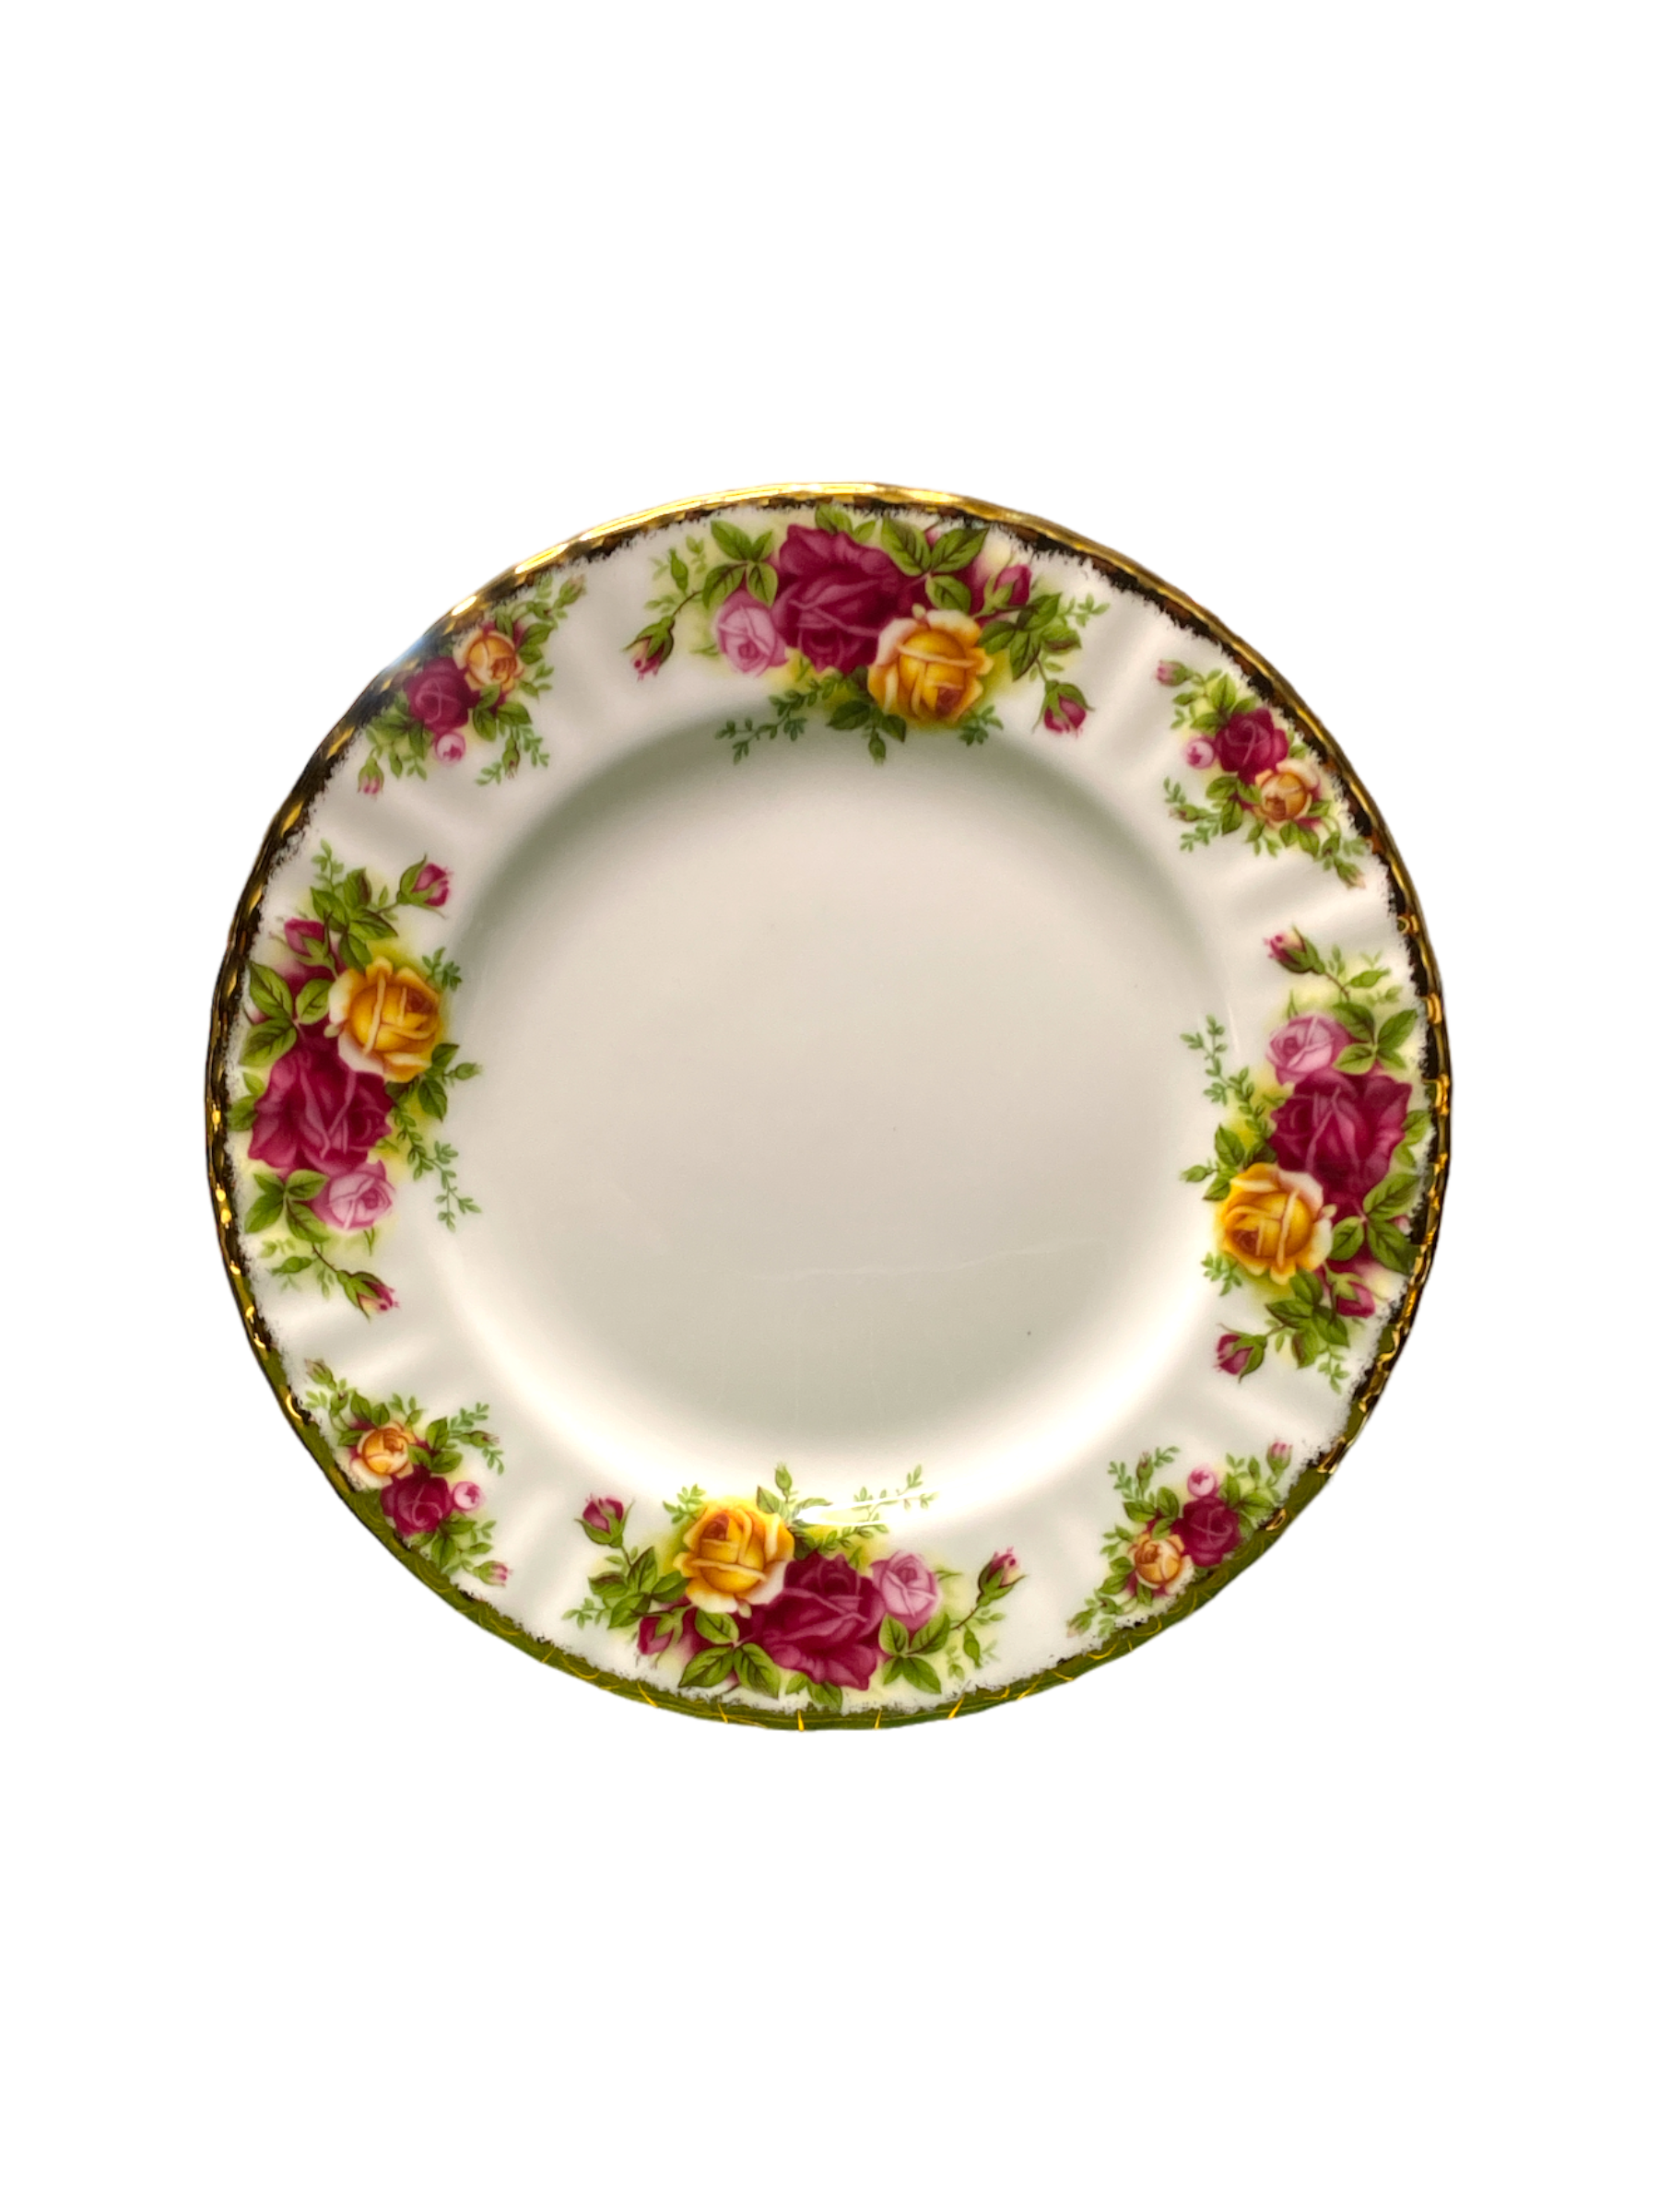 Royal Albert Old Country Roses Salad/Dessert Plate - Second Quality